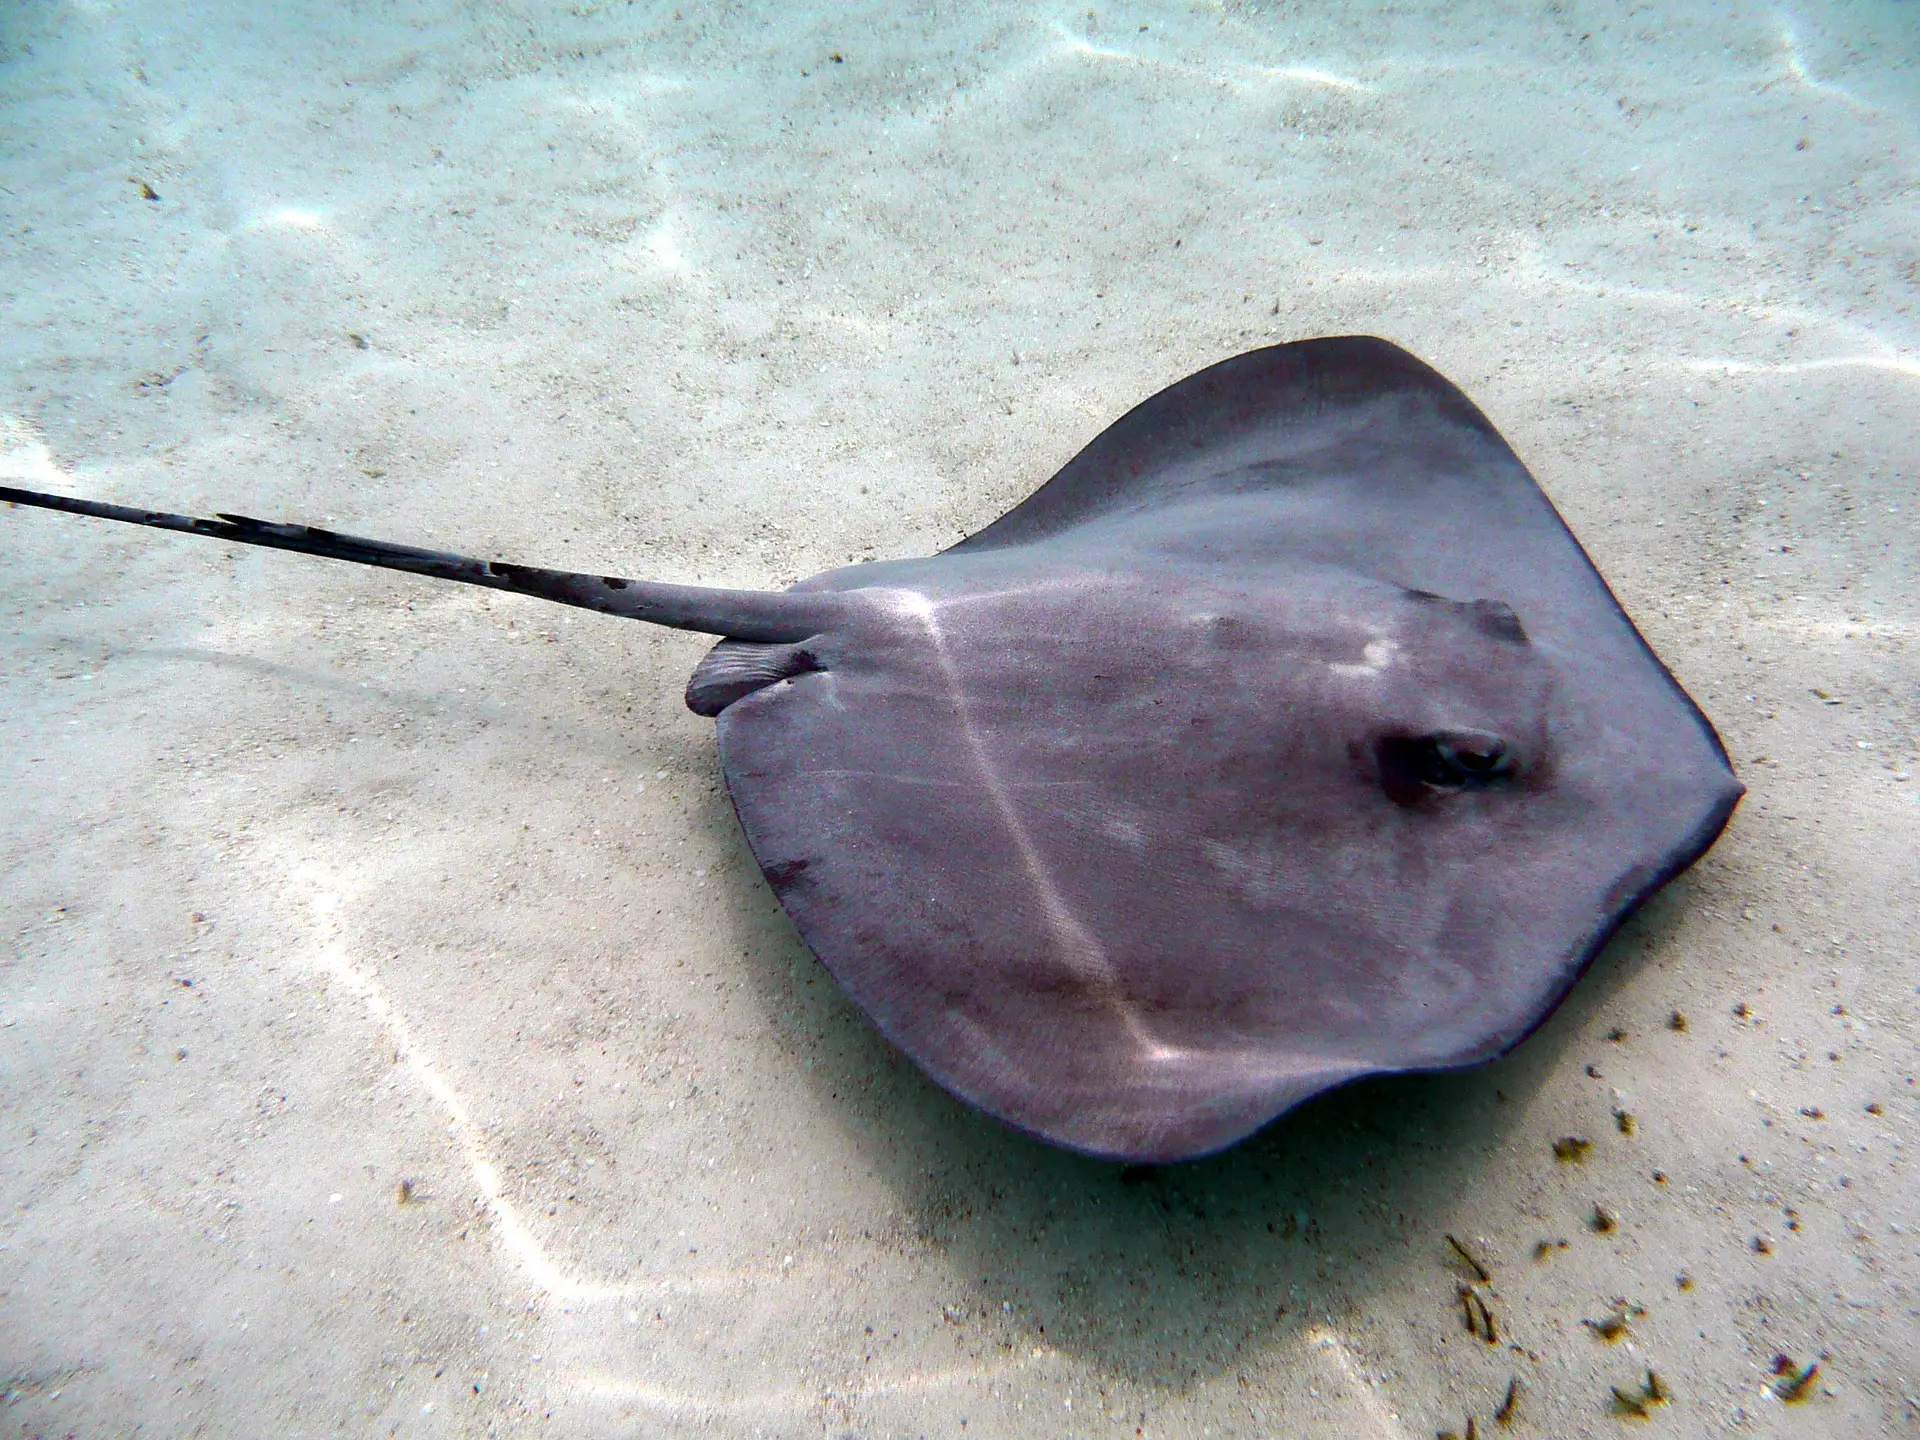 A stingray swimming in clear water